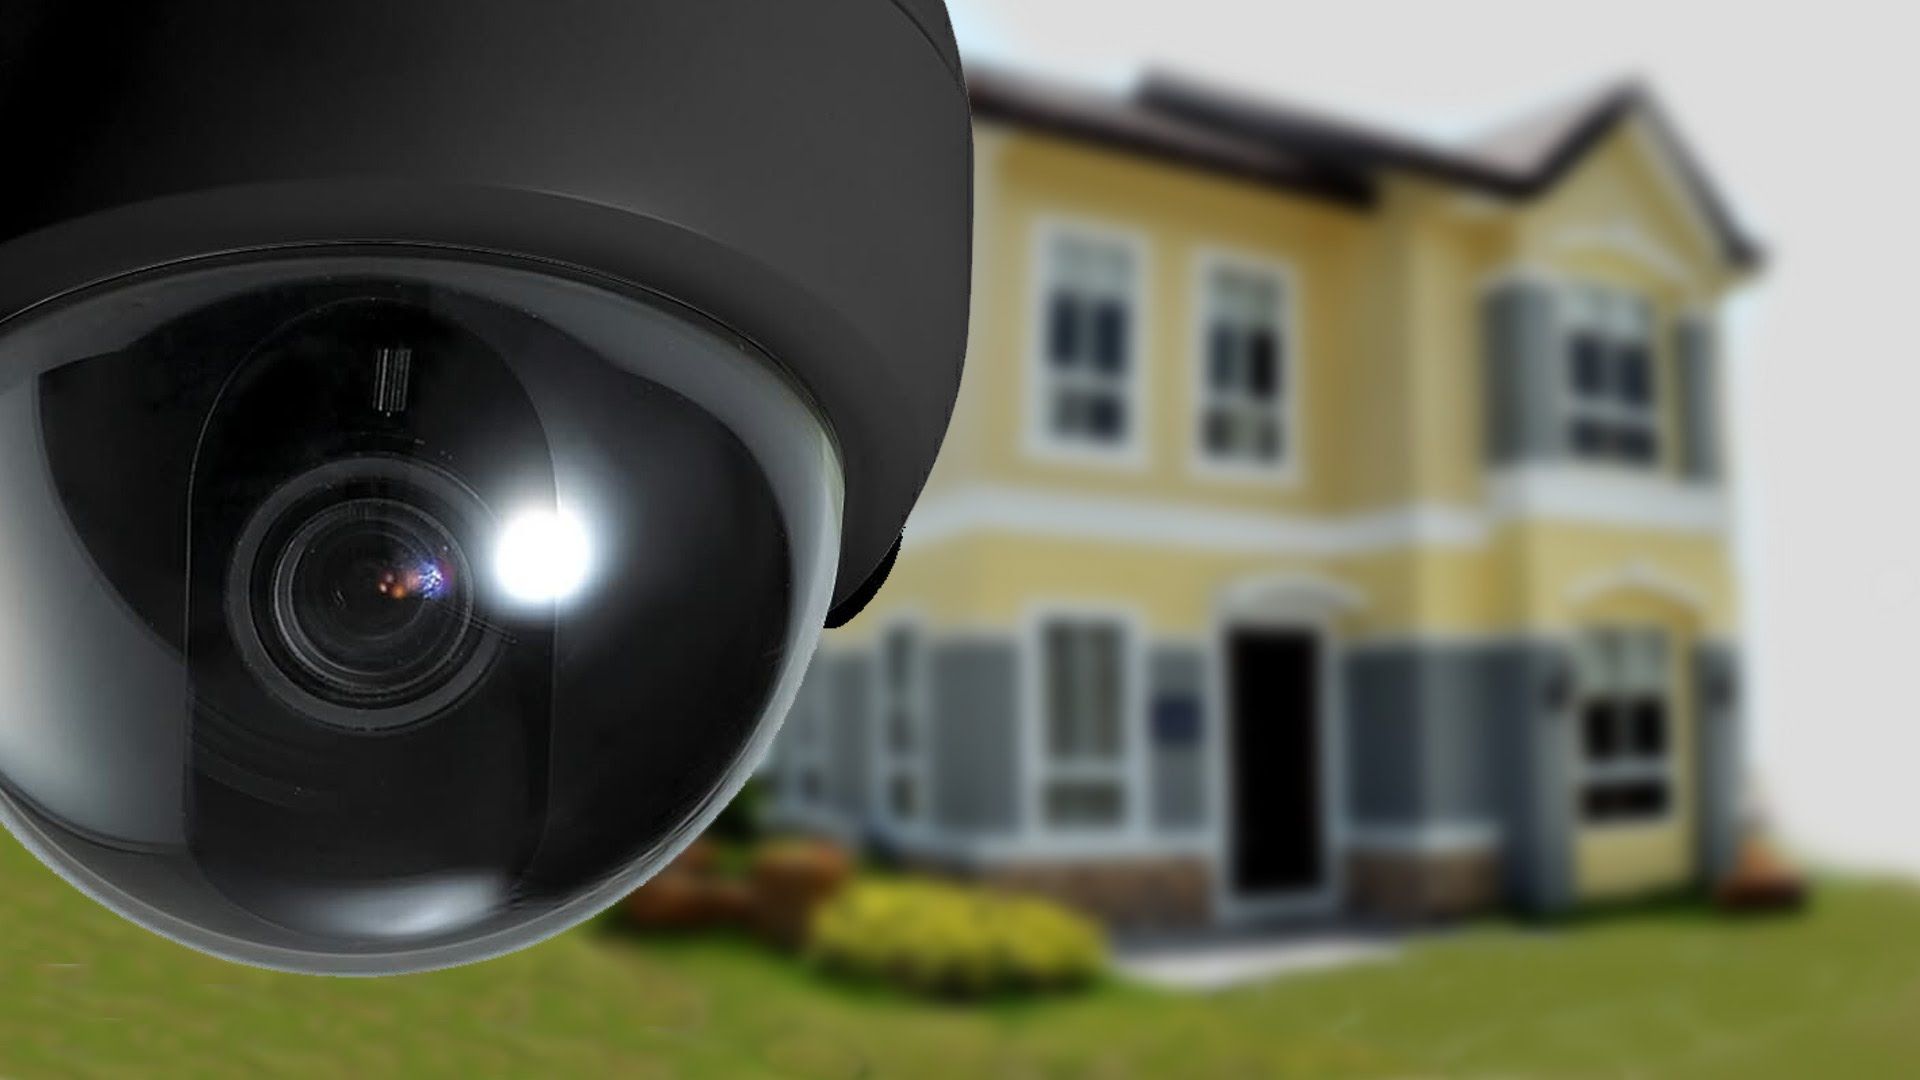 How to Set Up a Security Camera at Home